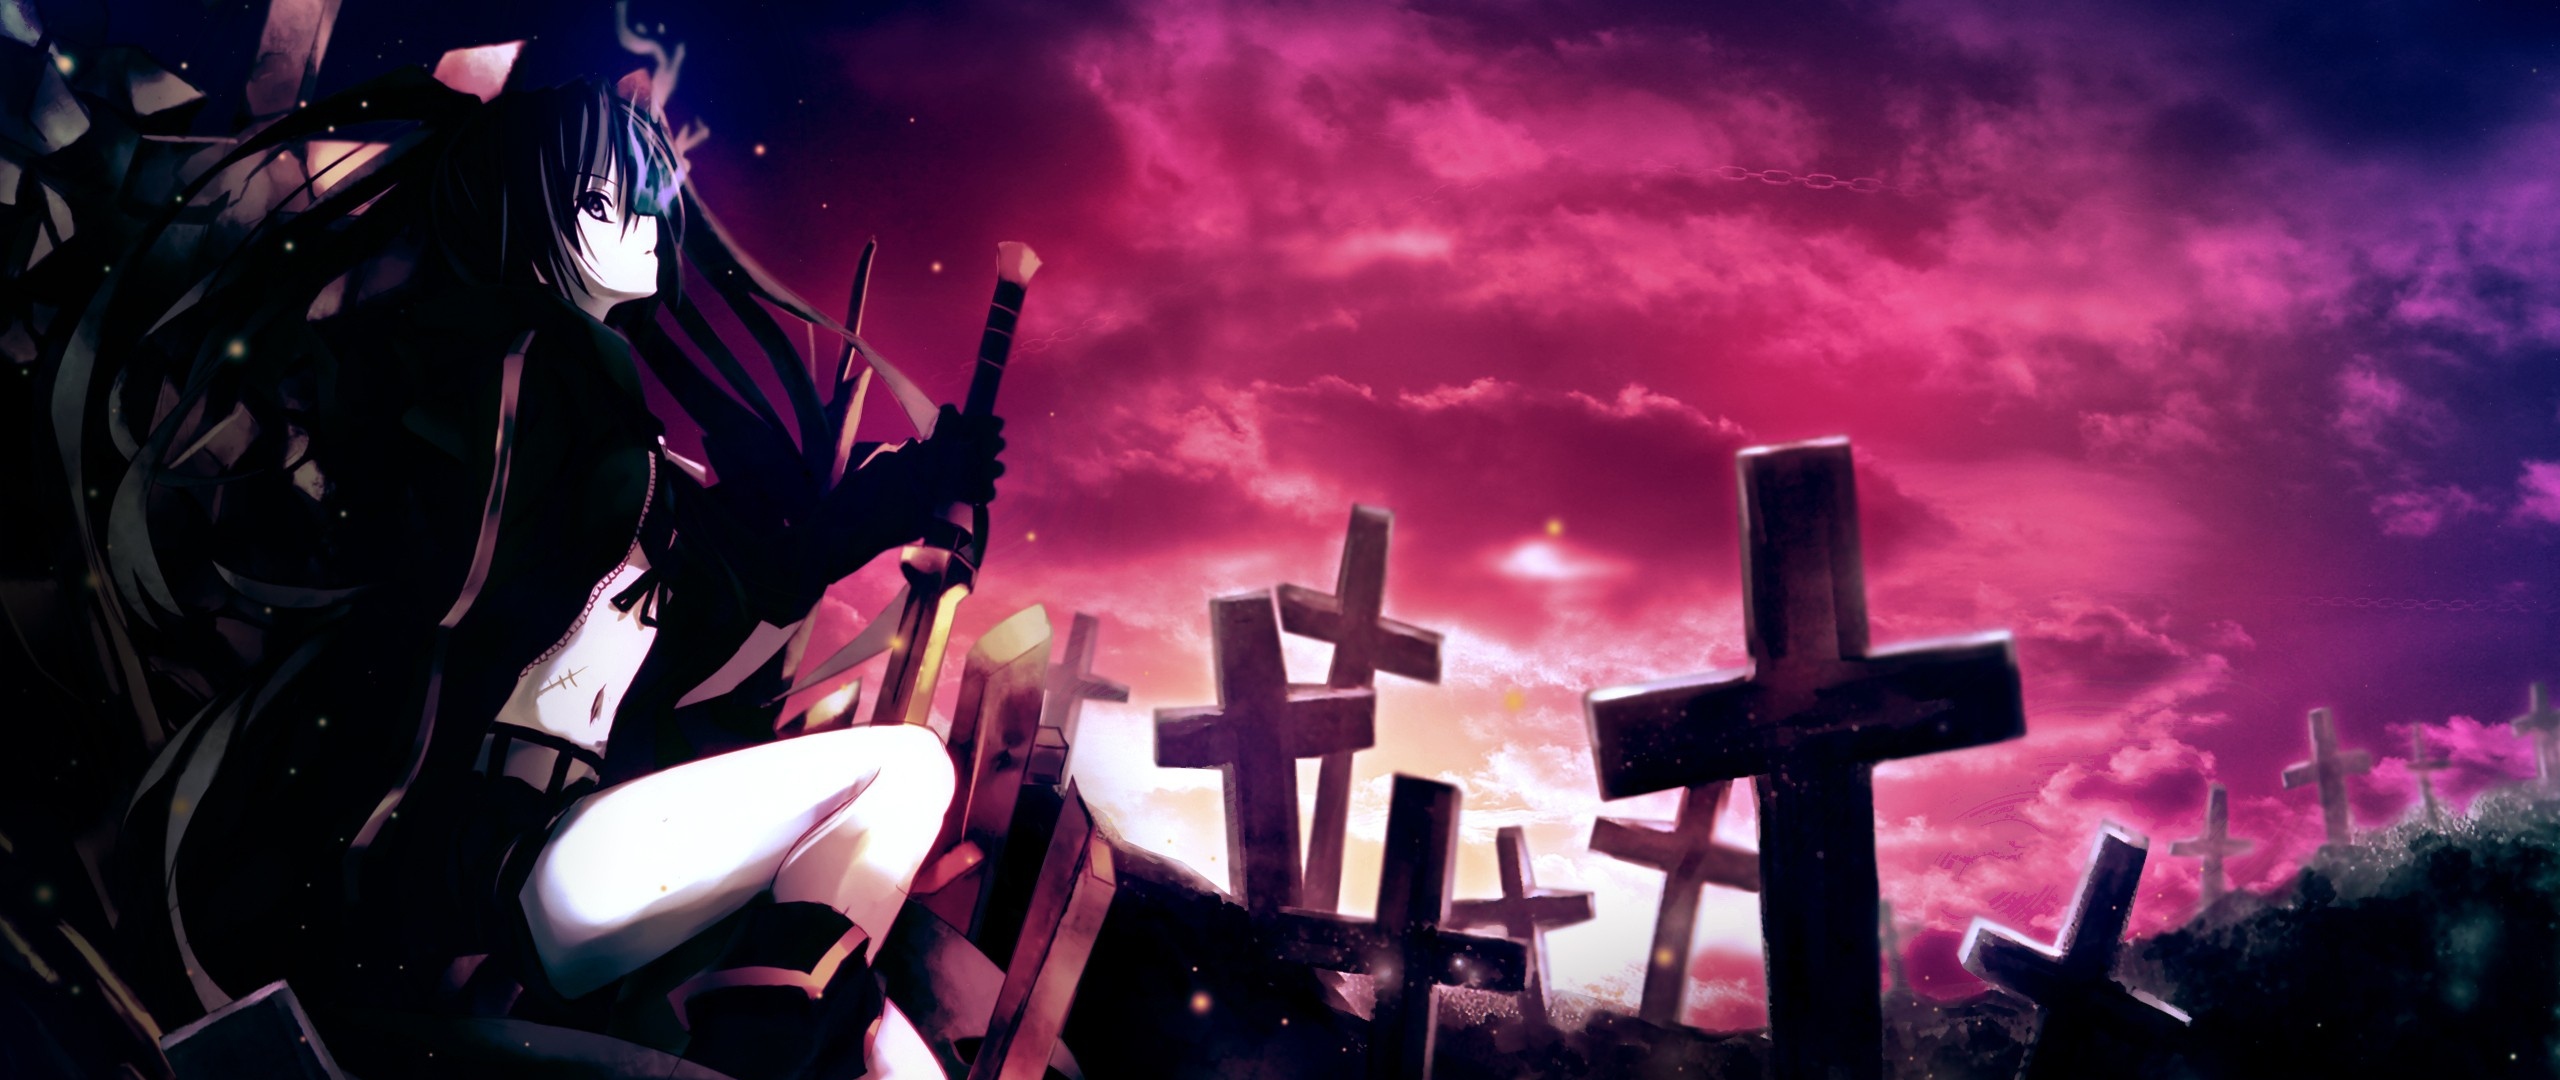 Anime Girl Thoughtful Sword Cemetery Darkness Wallpaper